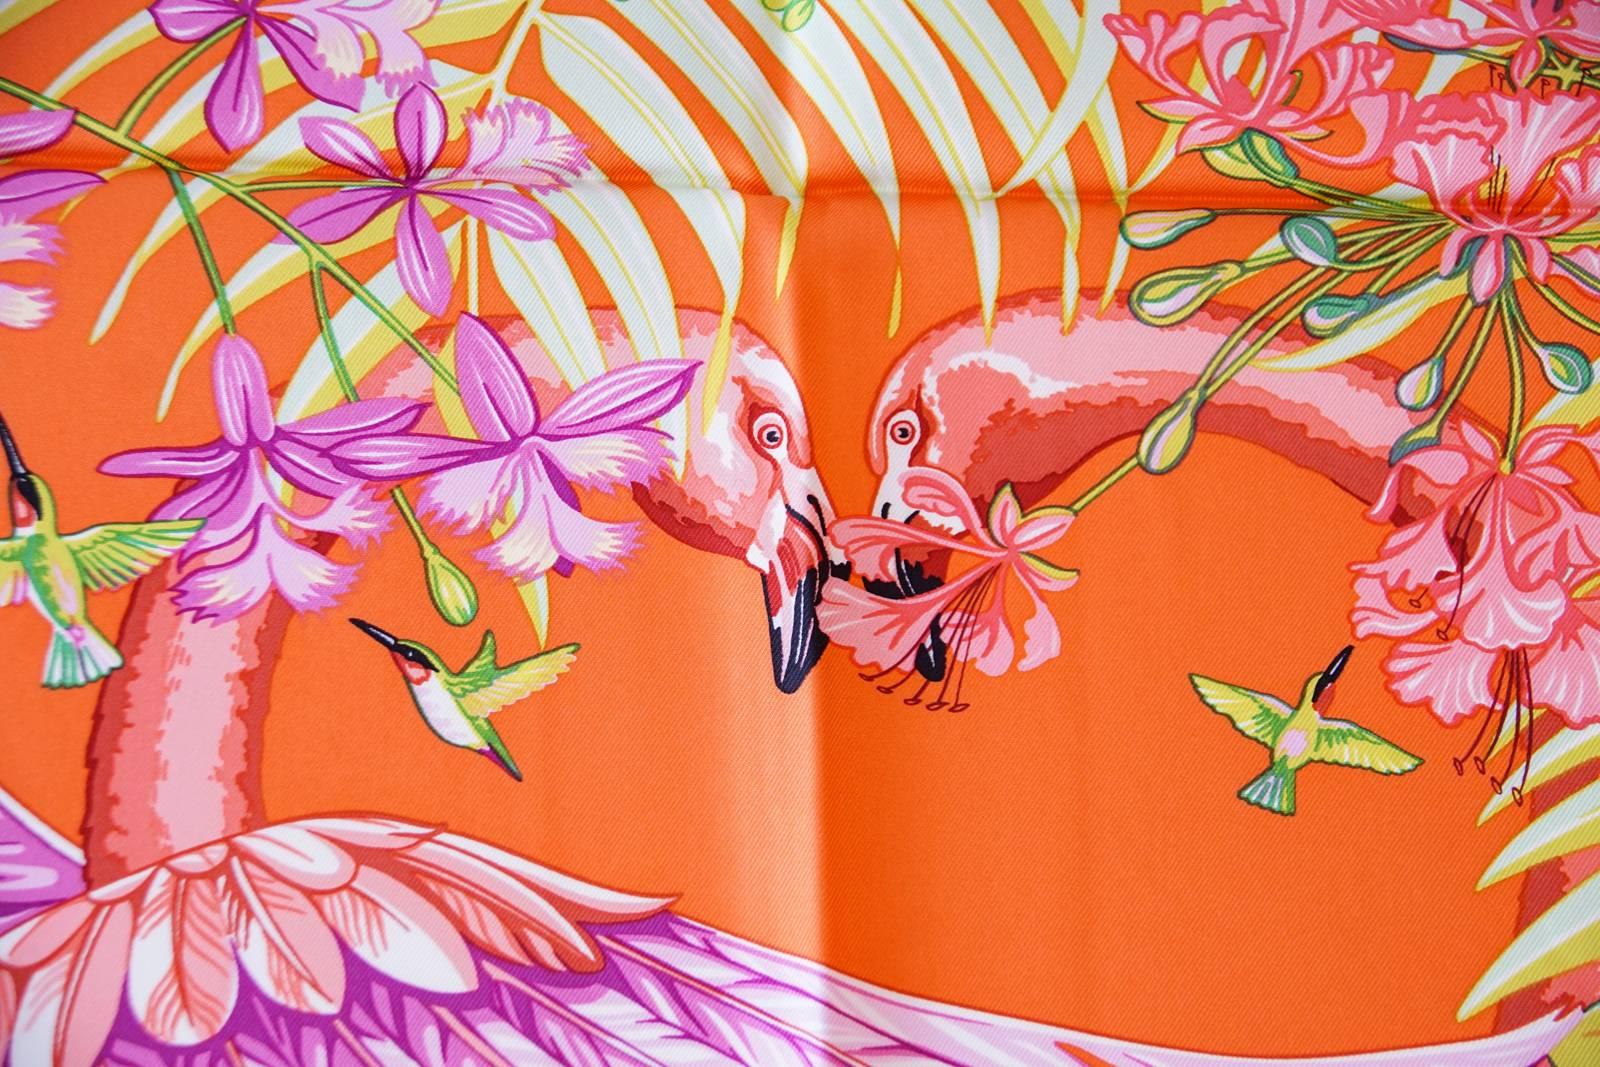 Guaranteed authentic limited edition Hermes Flamingo Party silk scarf created for the opening of the Miami Hermes store. 
Exotic lush plants and flowers with Flamingos and hummingbirds.
Rich Fuschia pink, orange, navy and greens.
HERMES - MIAMI